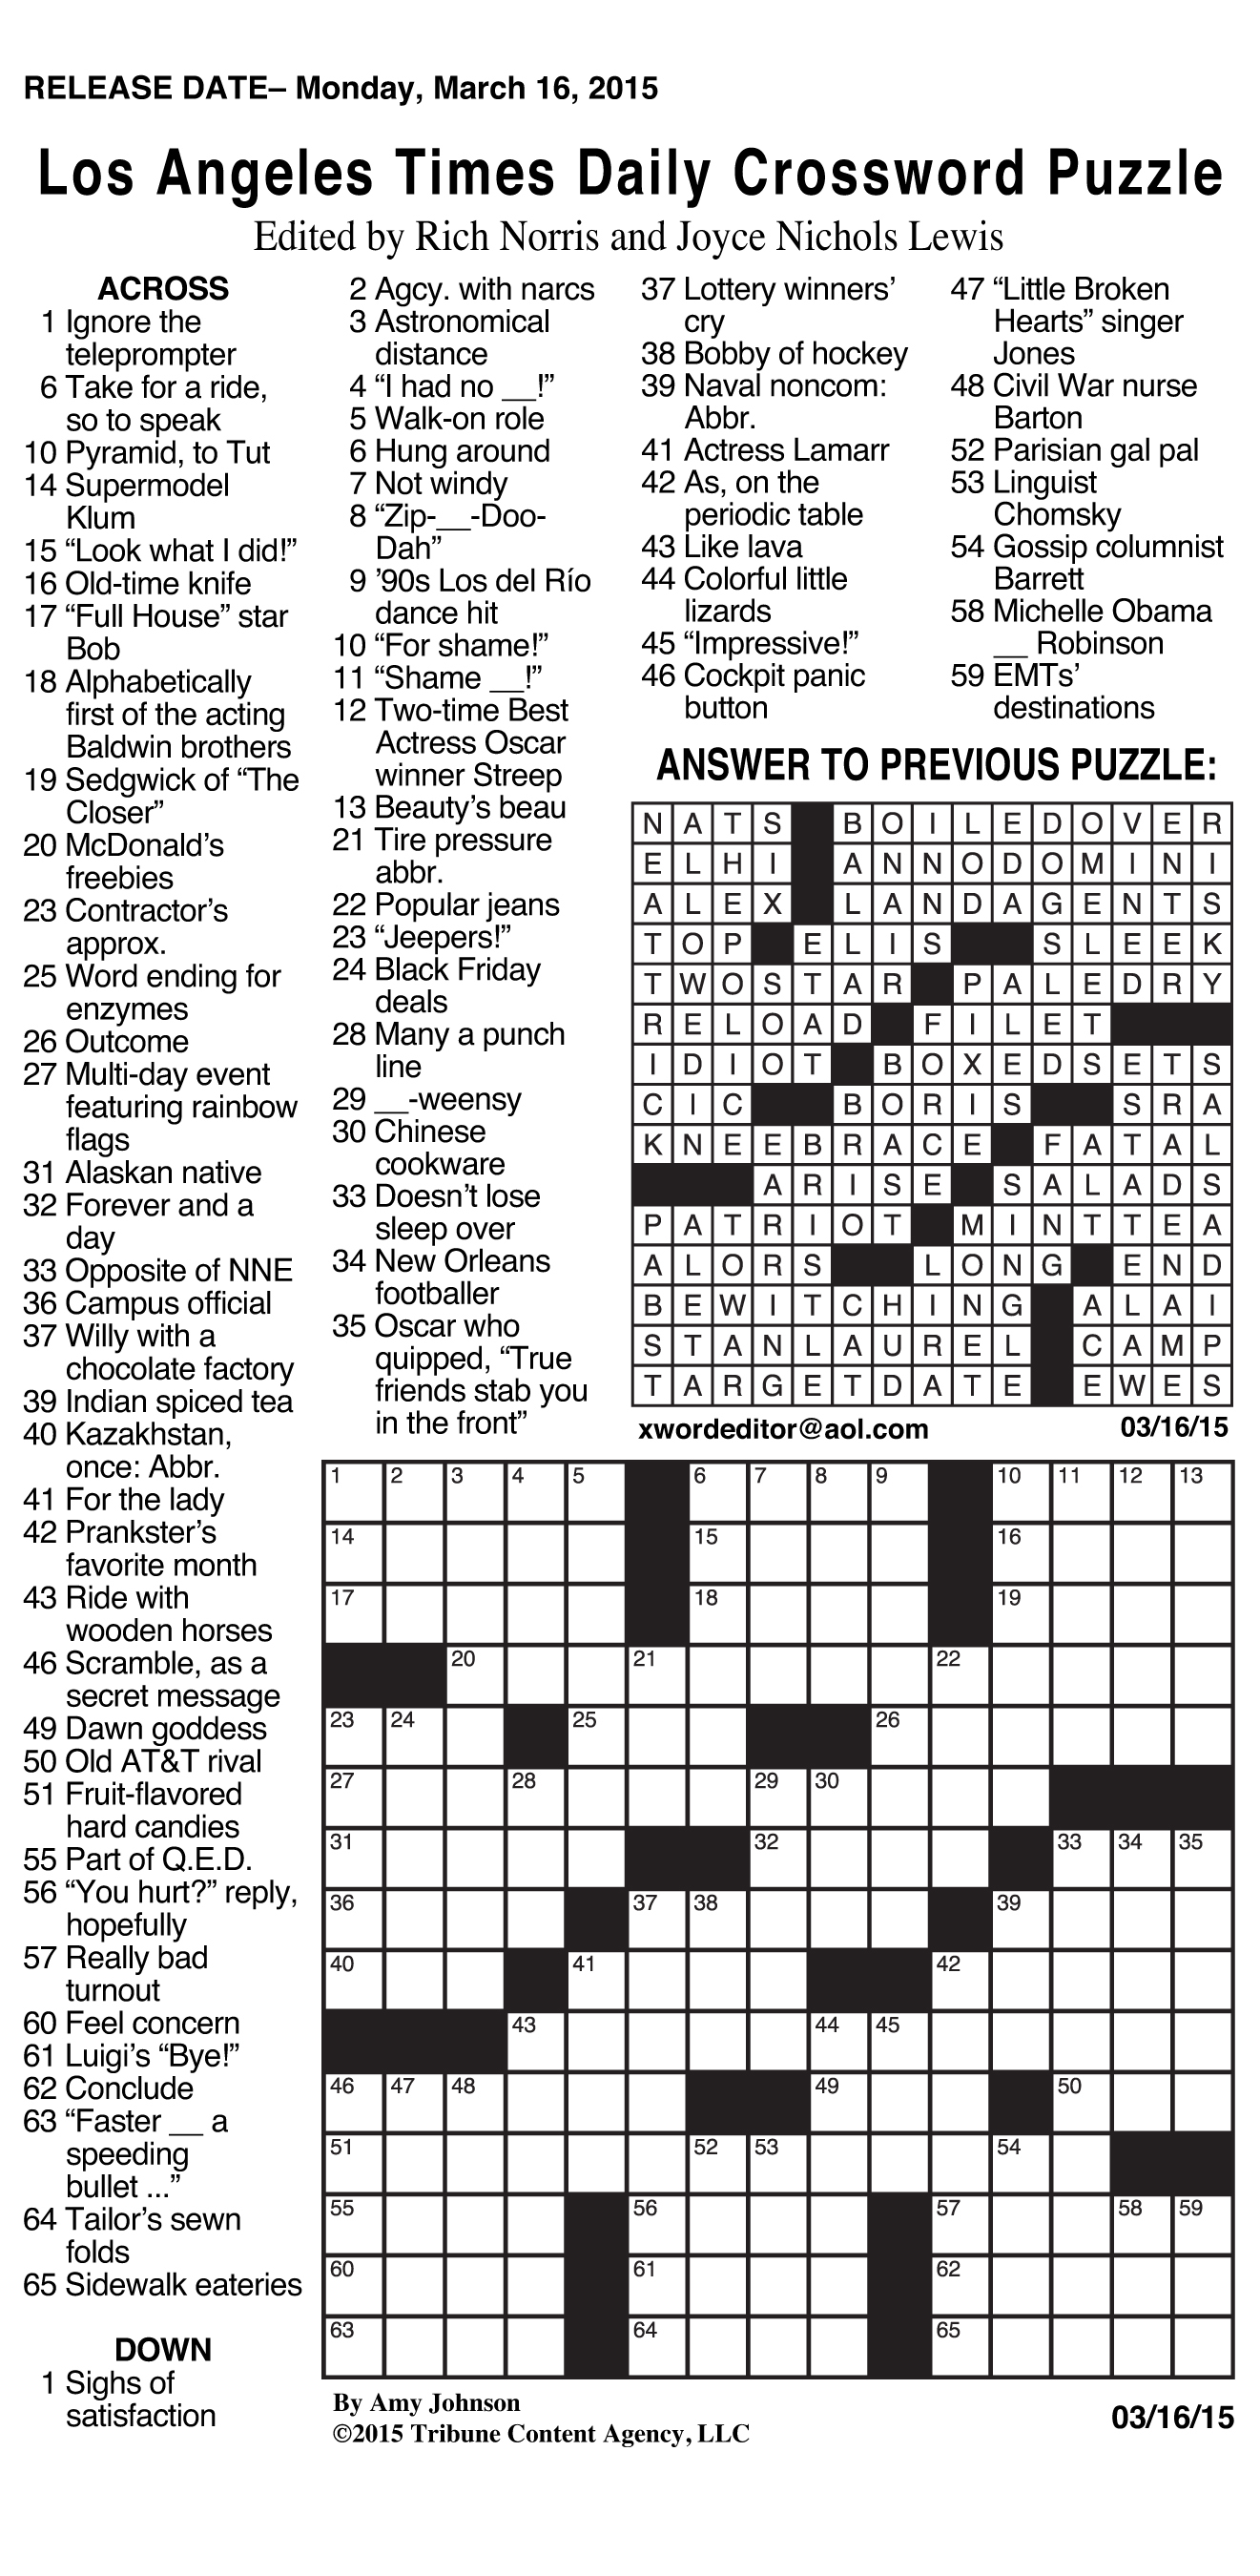 Sample Of Los Angeles Times Daily Crossword Puzzle | Tribune Content - Printable Newspaper Crossword Puzzles For Free